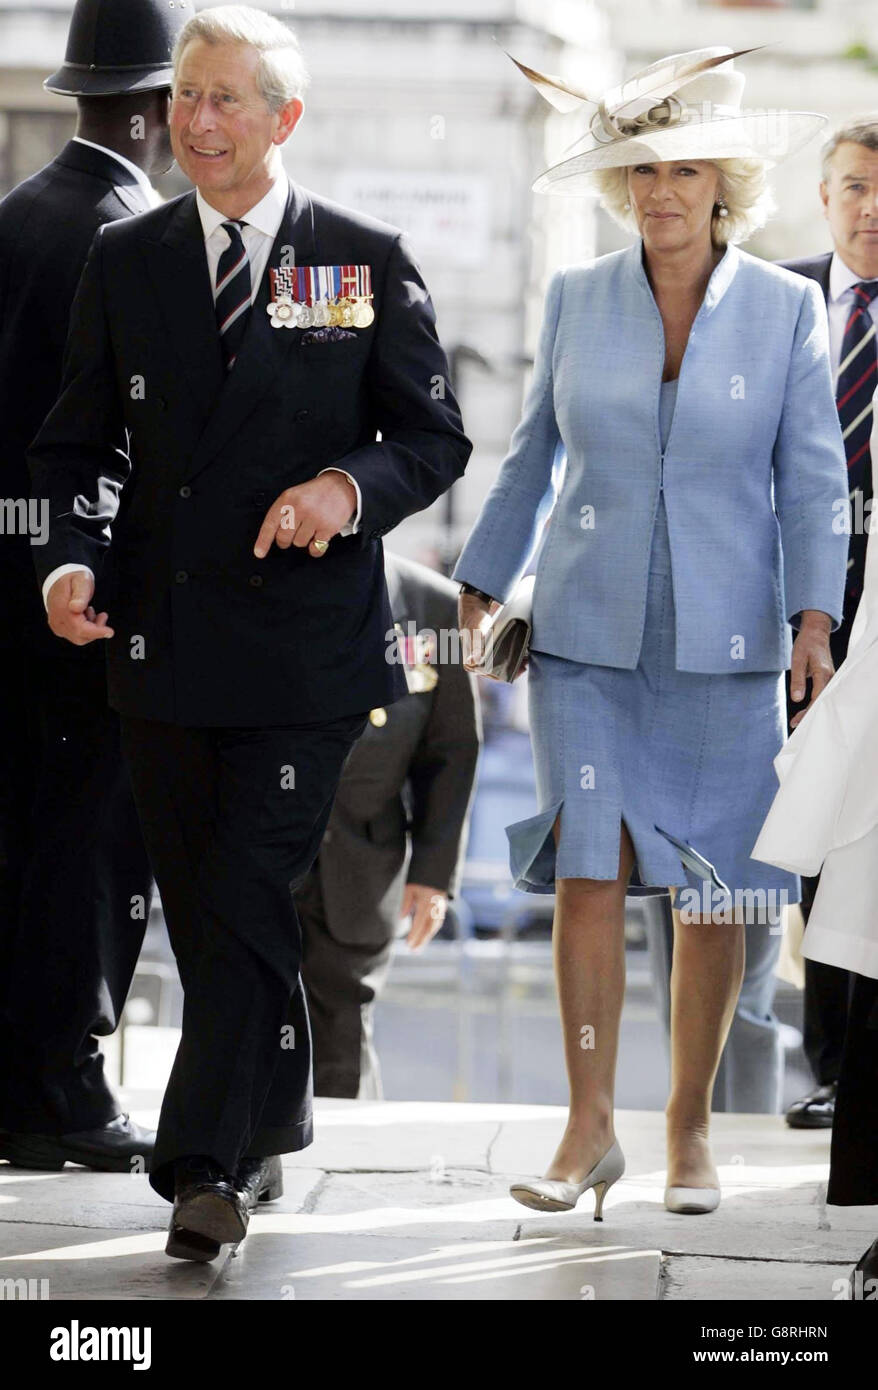 The Prince of Wales and the Duchess of Cornwall during the Service of Remembrance and Dedication in memory of former holders of the Victoria Cross at the St Martins-in-the fields Church, London, Tuesday September 13, 2005. PRESS ASSOCIATION Photo. Photo credit should read: Andrew Parsons/PA/WPA Rota Stock Photo